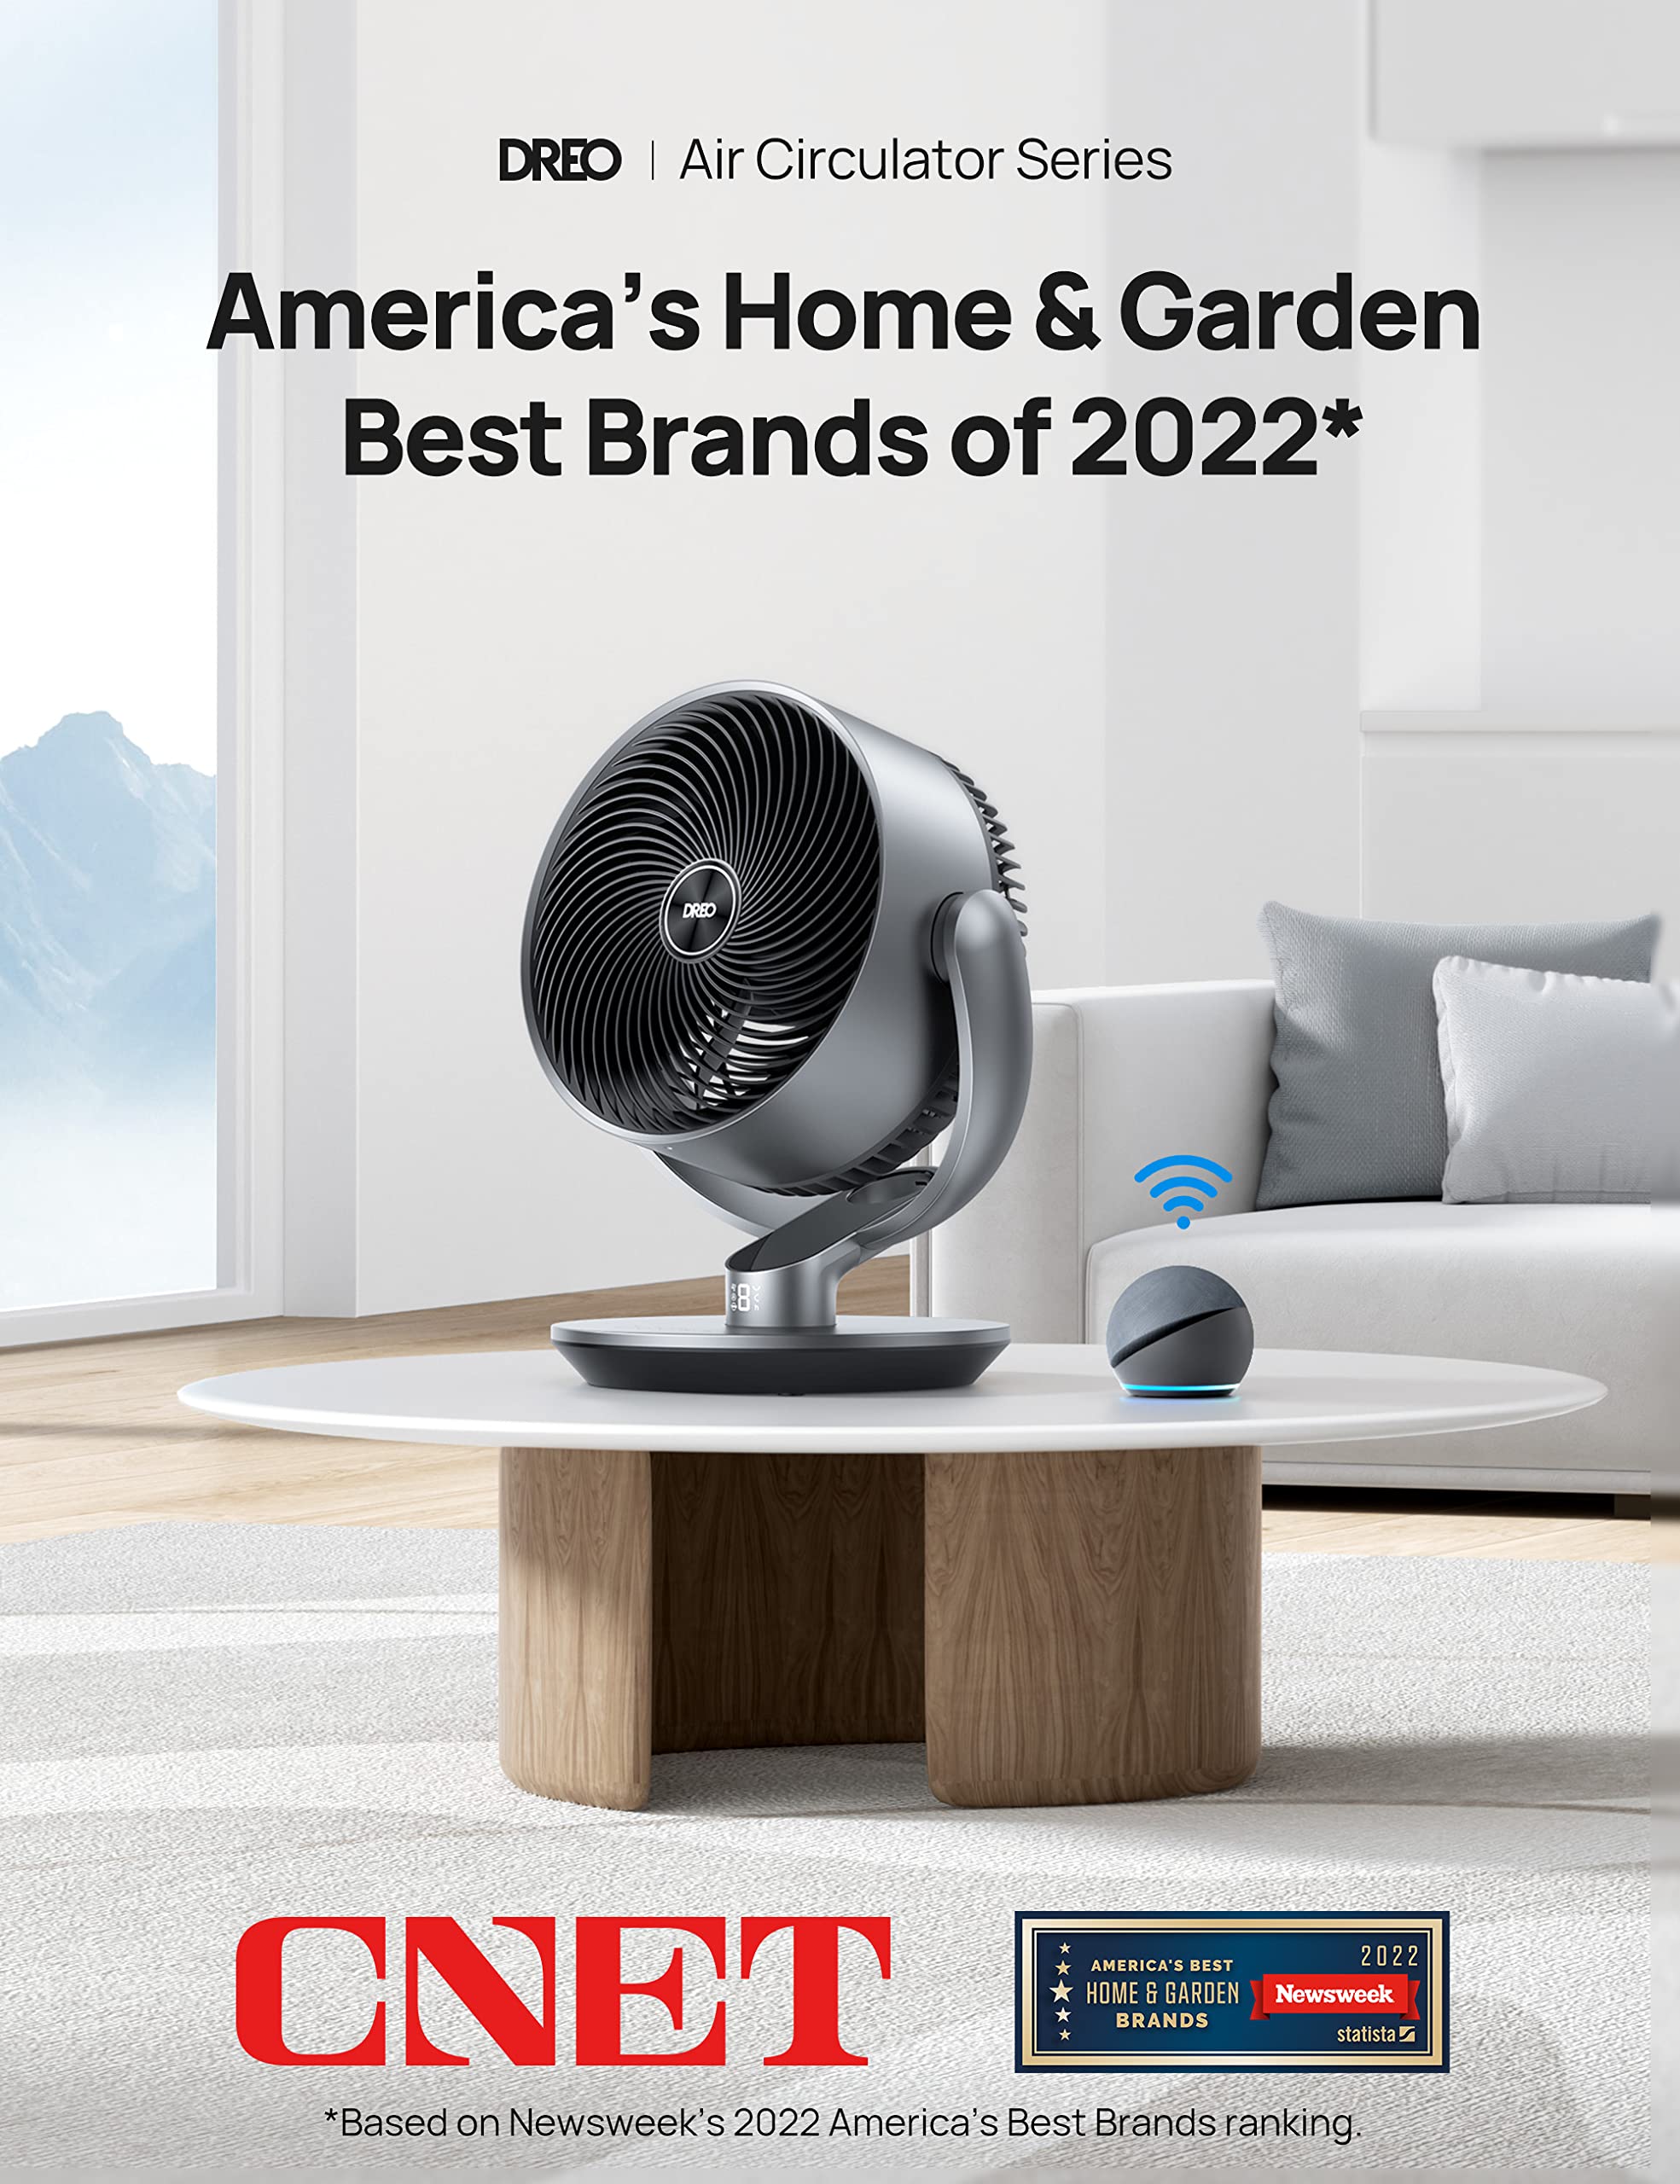 Dreo Smart Fans for Bedroom, 11 Inch, 25dB Quiet DC Room Fan with Remote, 120°+90° Oscillating Fan, 6 Modes, 9 Speeds, 12H Timer,Works Alexa/Google/WiFi/Voice Control, Silver, Oversize (DR-HAF004S)